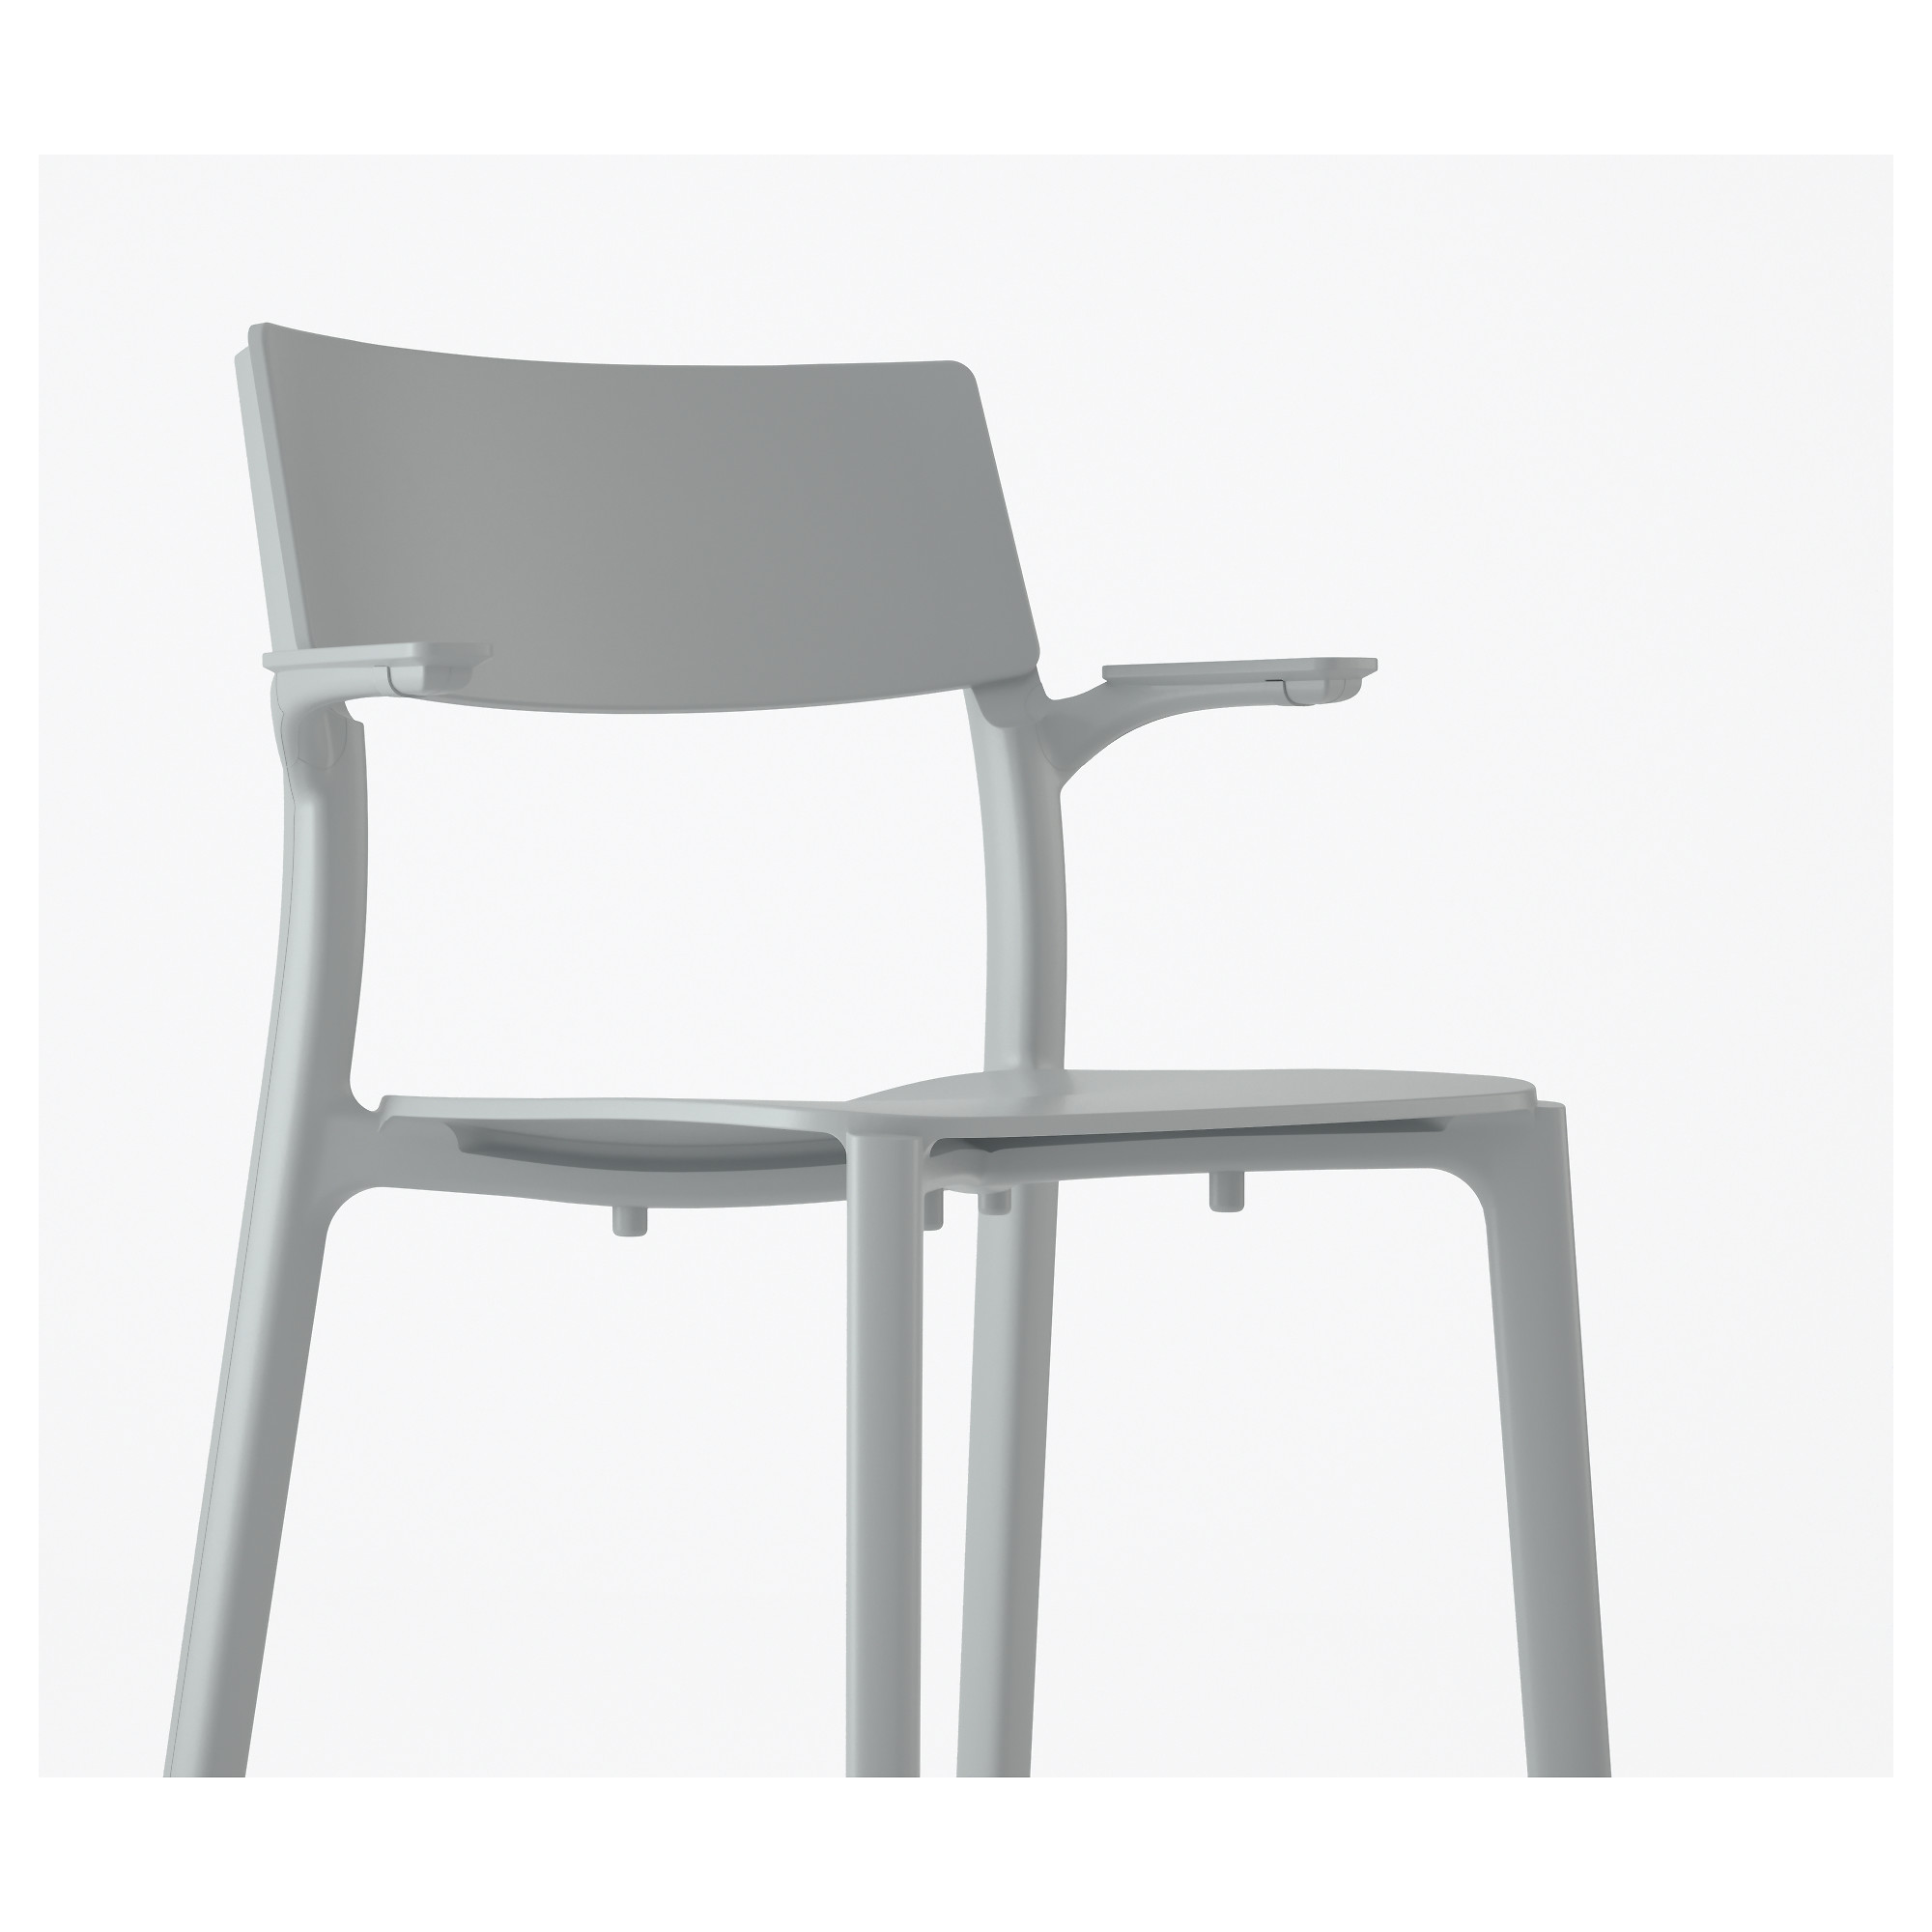 JANINGE chair with armrests